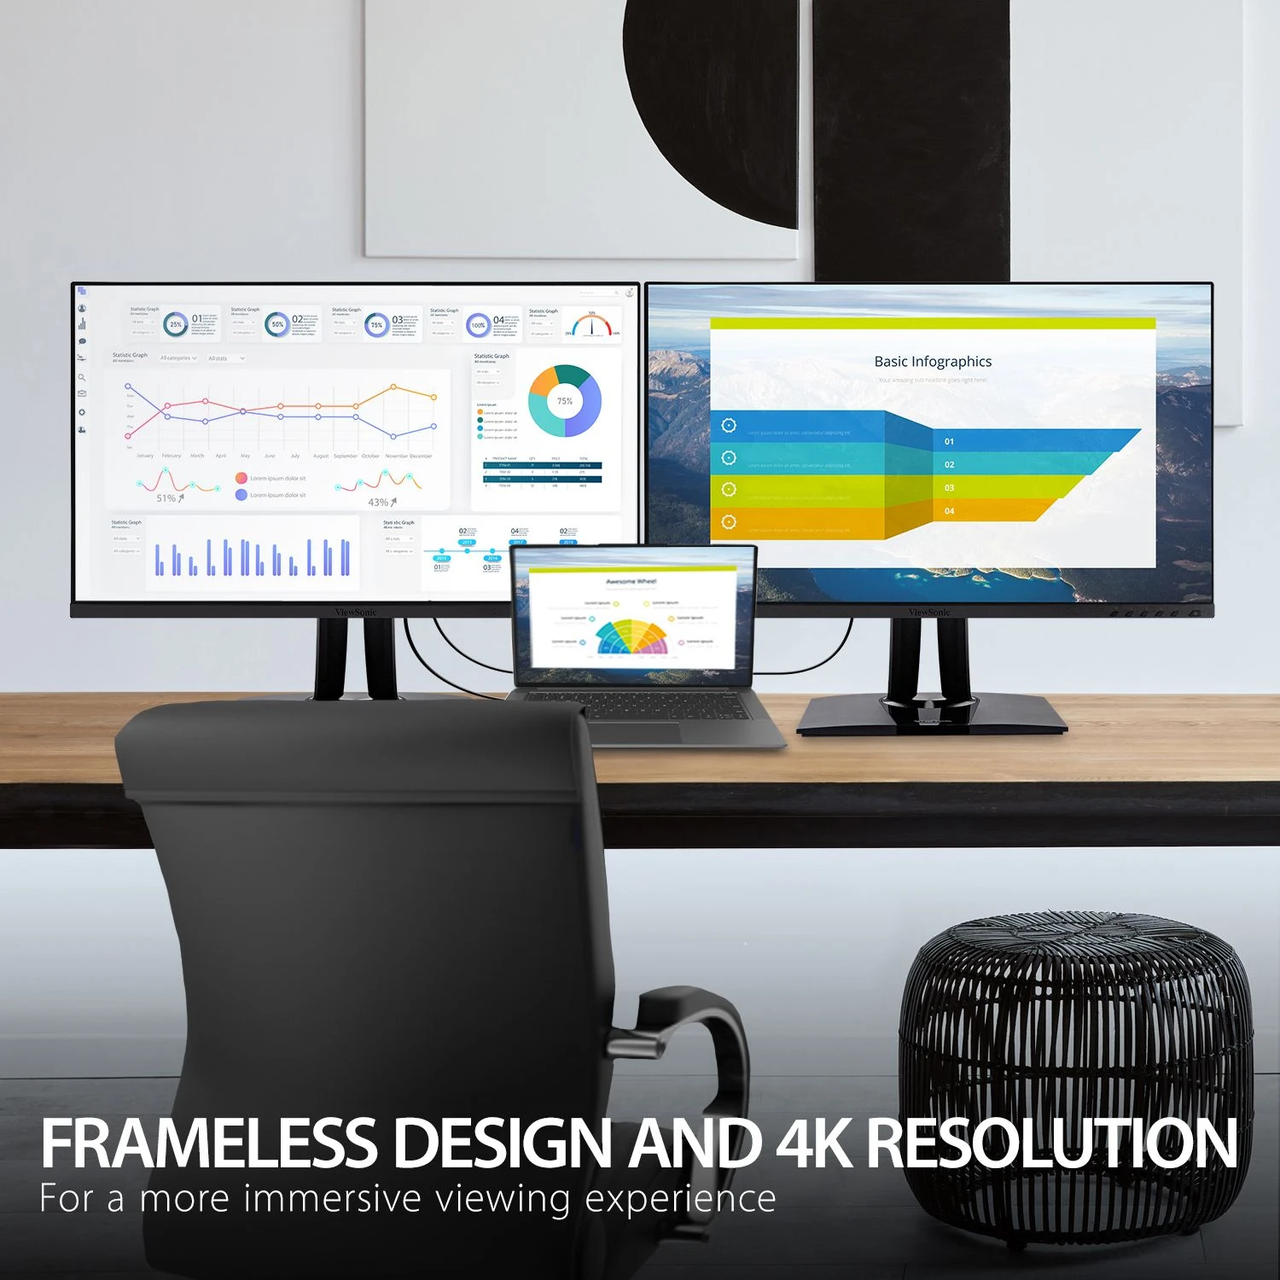 Viewsonic 27" ColorPro™ 4K UHD IPS Monitor with 60W USB C, sRGB and Pantone Validated